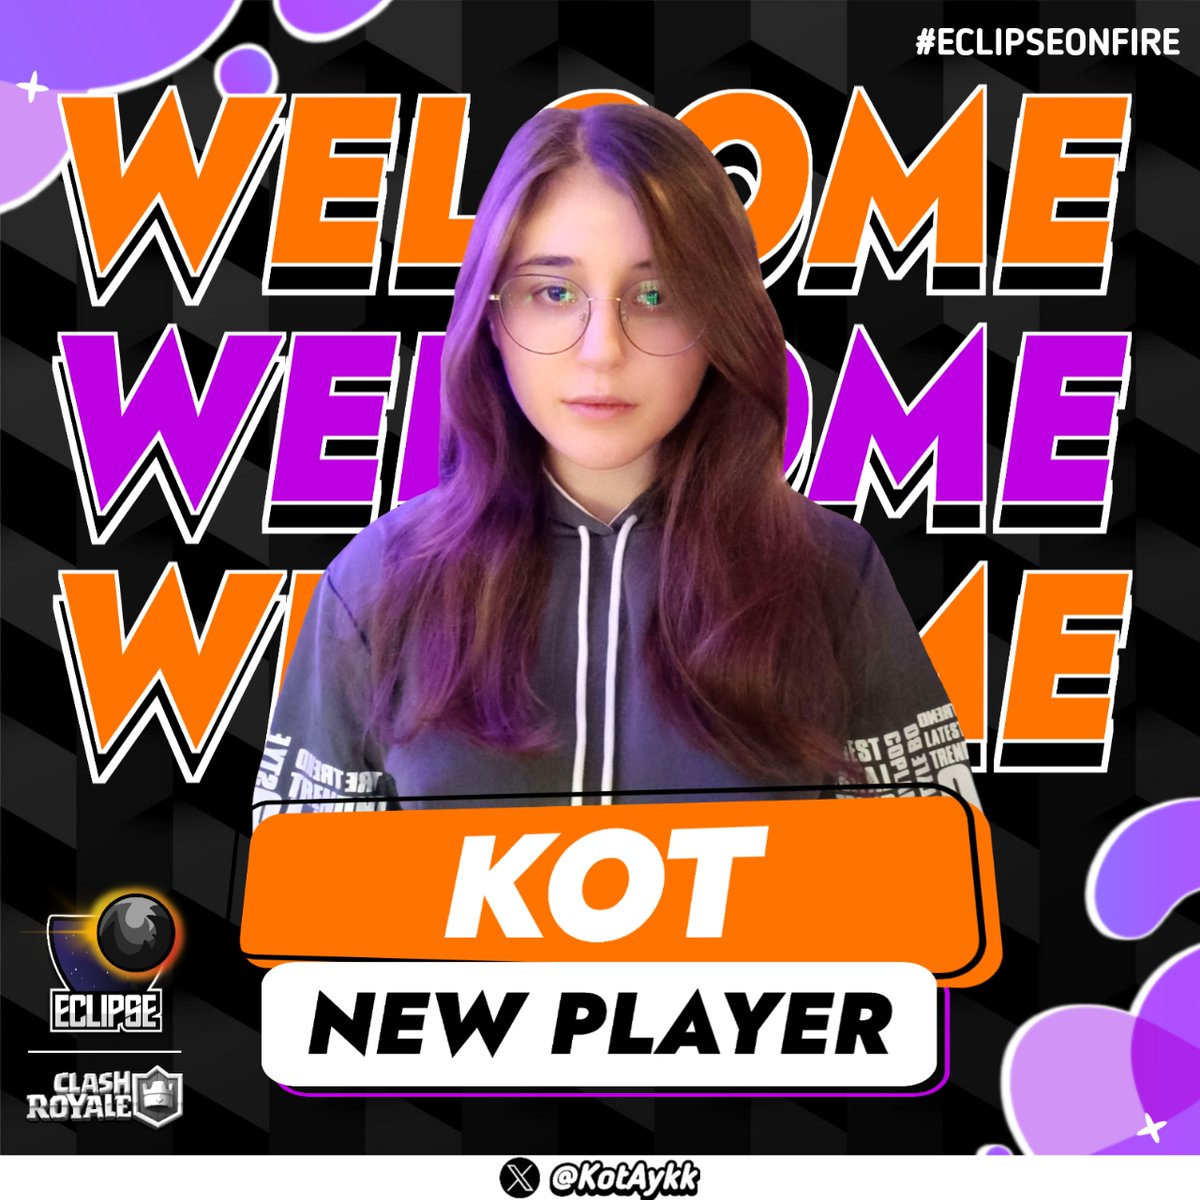 #CR || Mercato🟠🟣 Today we have the pleasure to introduce you @KotAykk ! 🇺🇦 She will join our boys roster due to her insane performance ! #EclipseOnFire